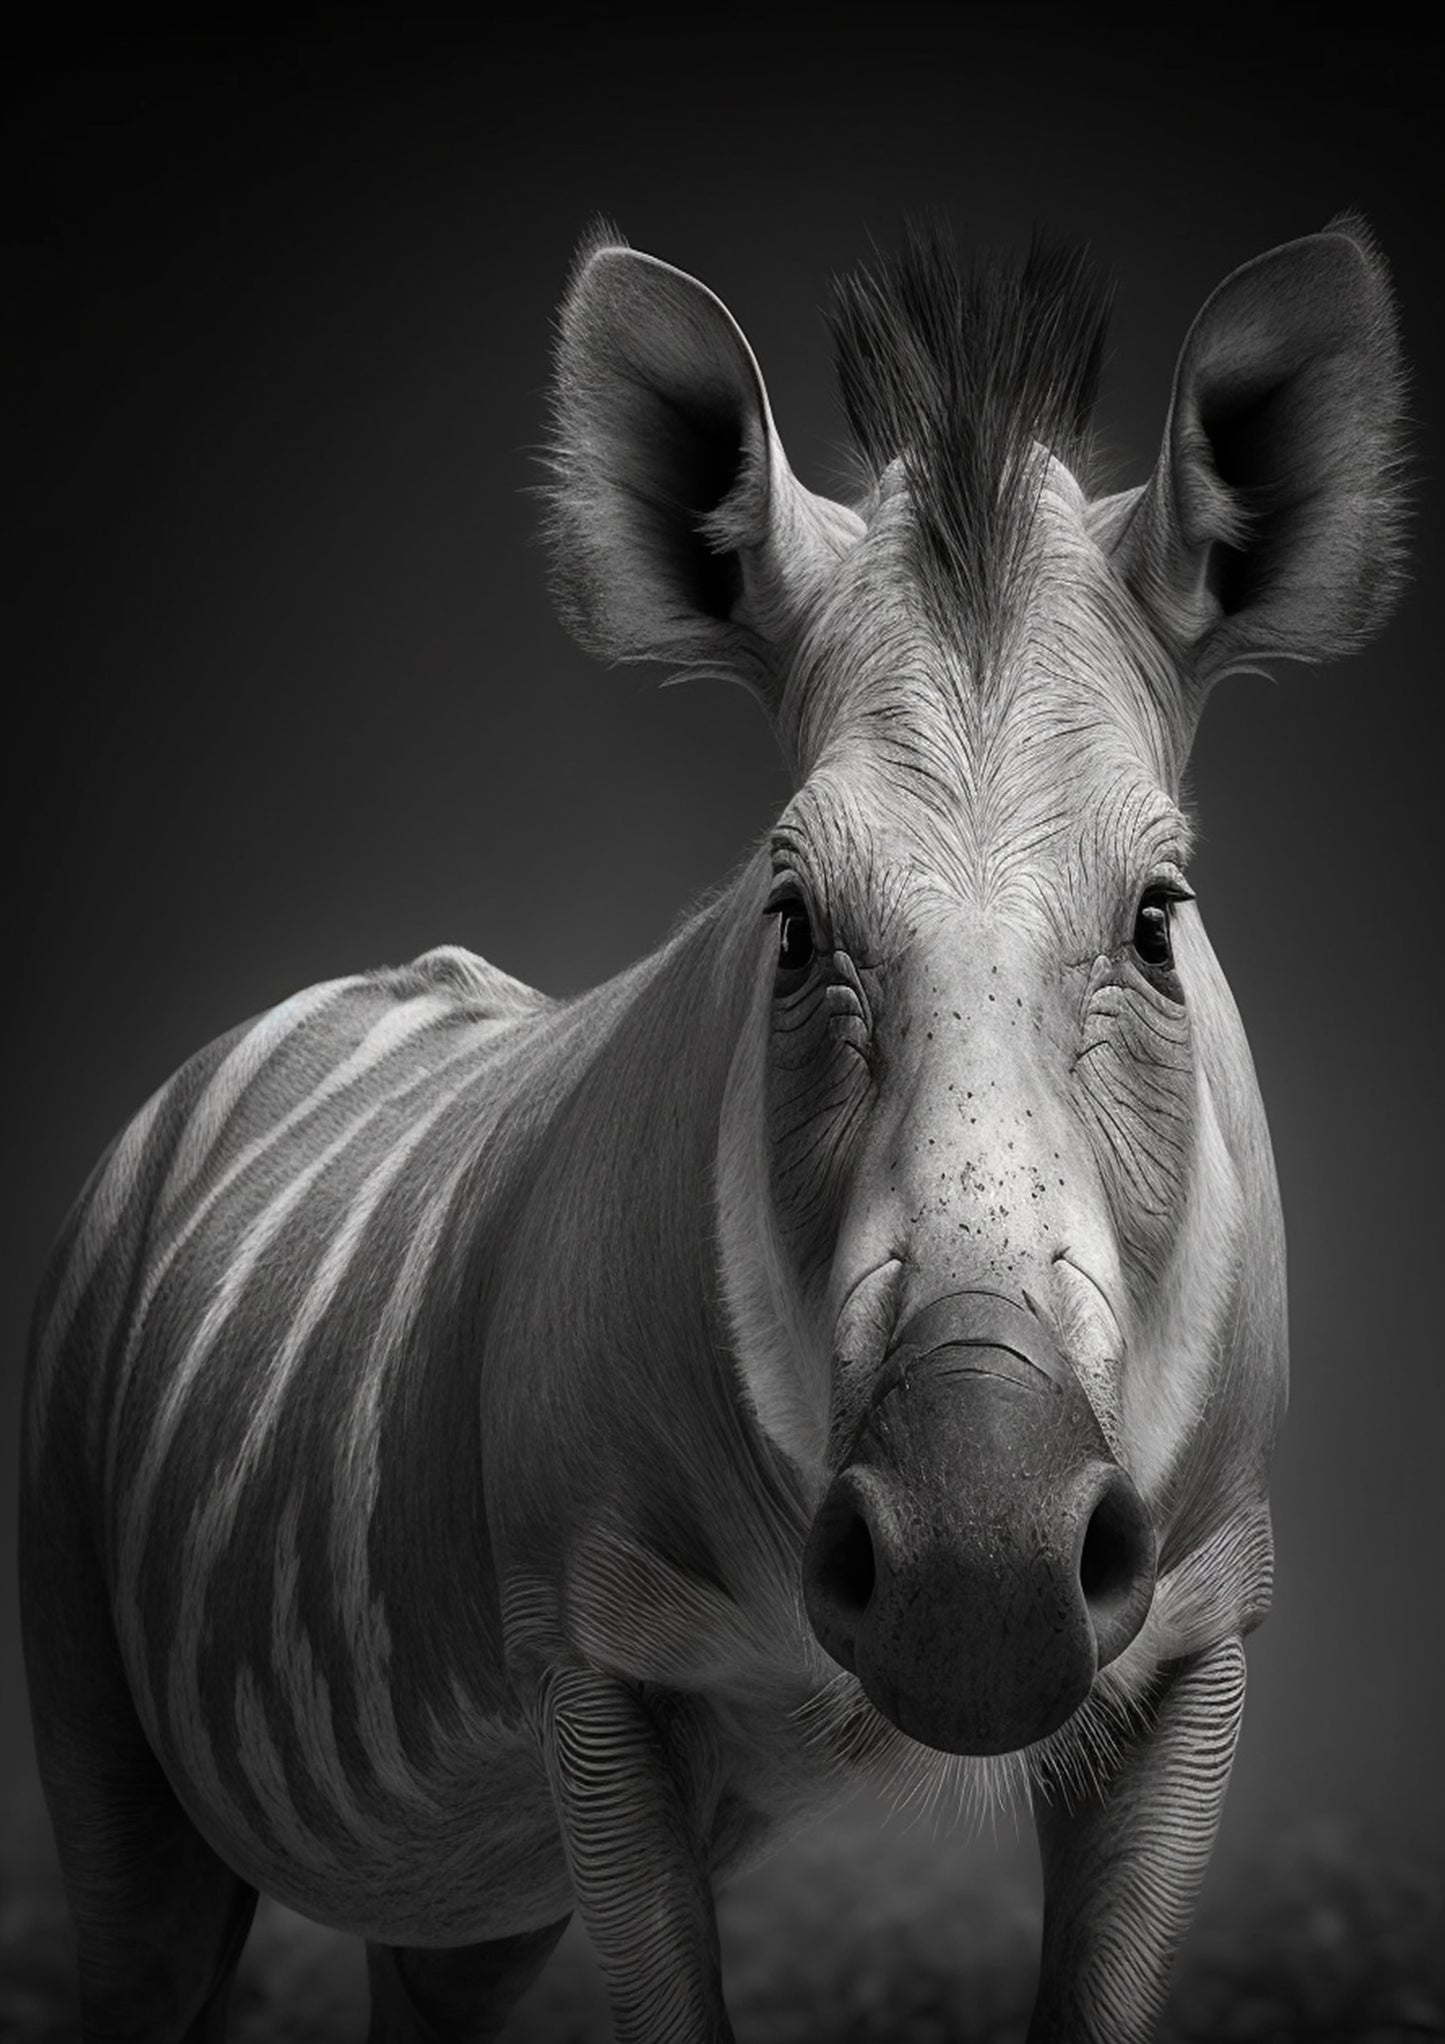 The monochrome wild animal’s collection - the Warthog